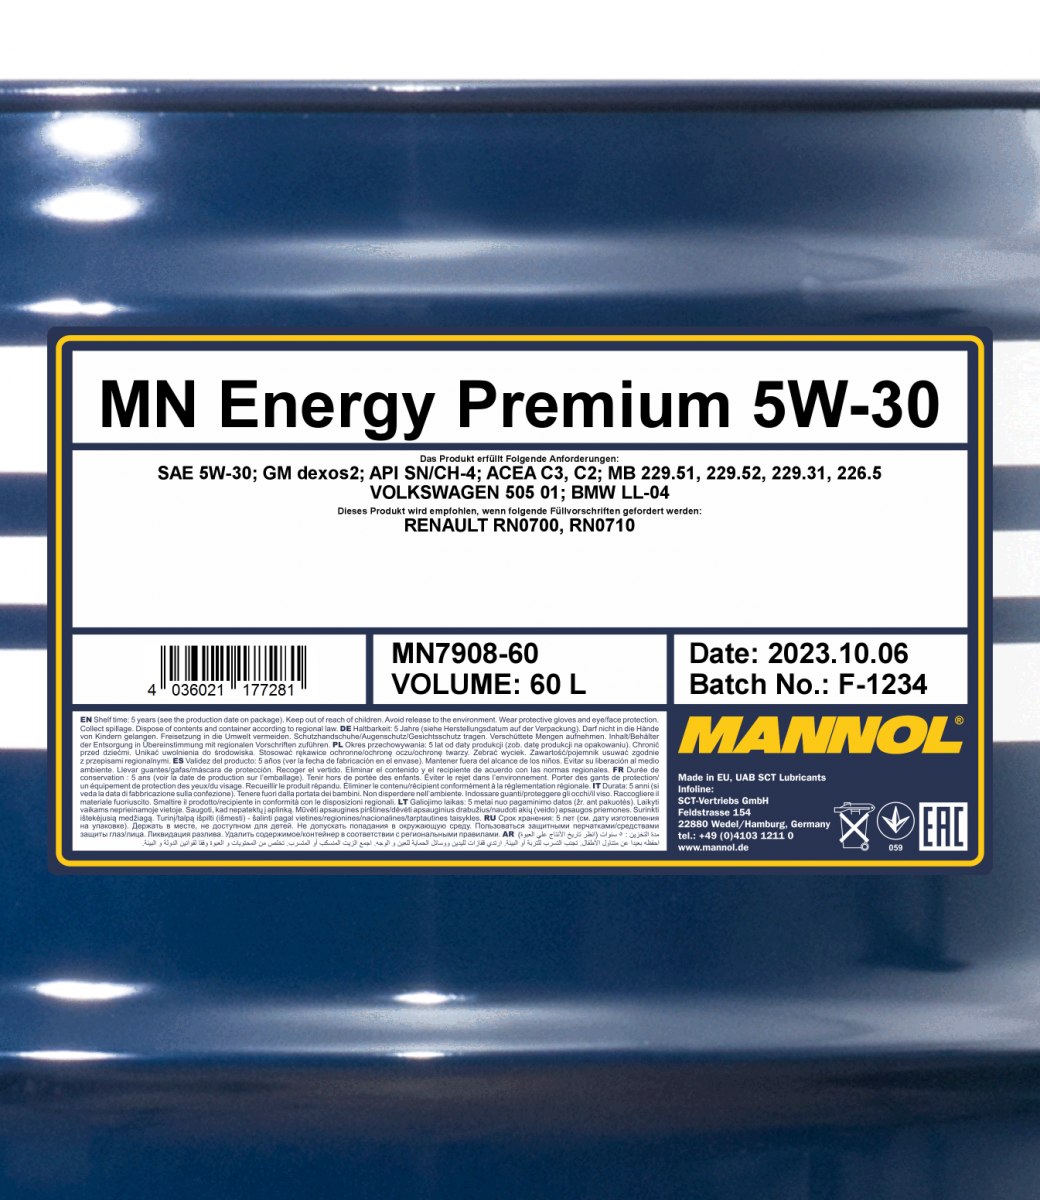 Mannol USA Inc. - ⚡#MercedesBenz #Approval 229.51⚡ ✓ MANNOL Energy Premium  5W-30 API SN/CF - Fully synthetic engine oil that is designed to be used in  petrol and diesel engine vehicles, which